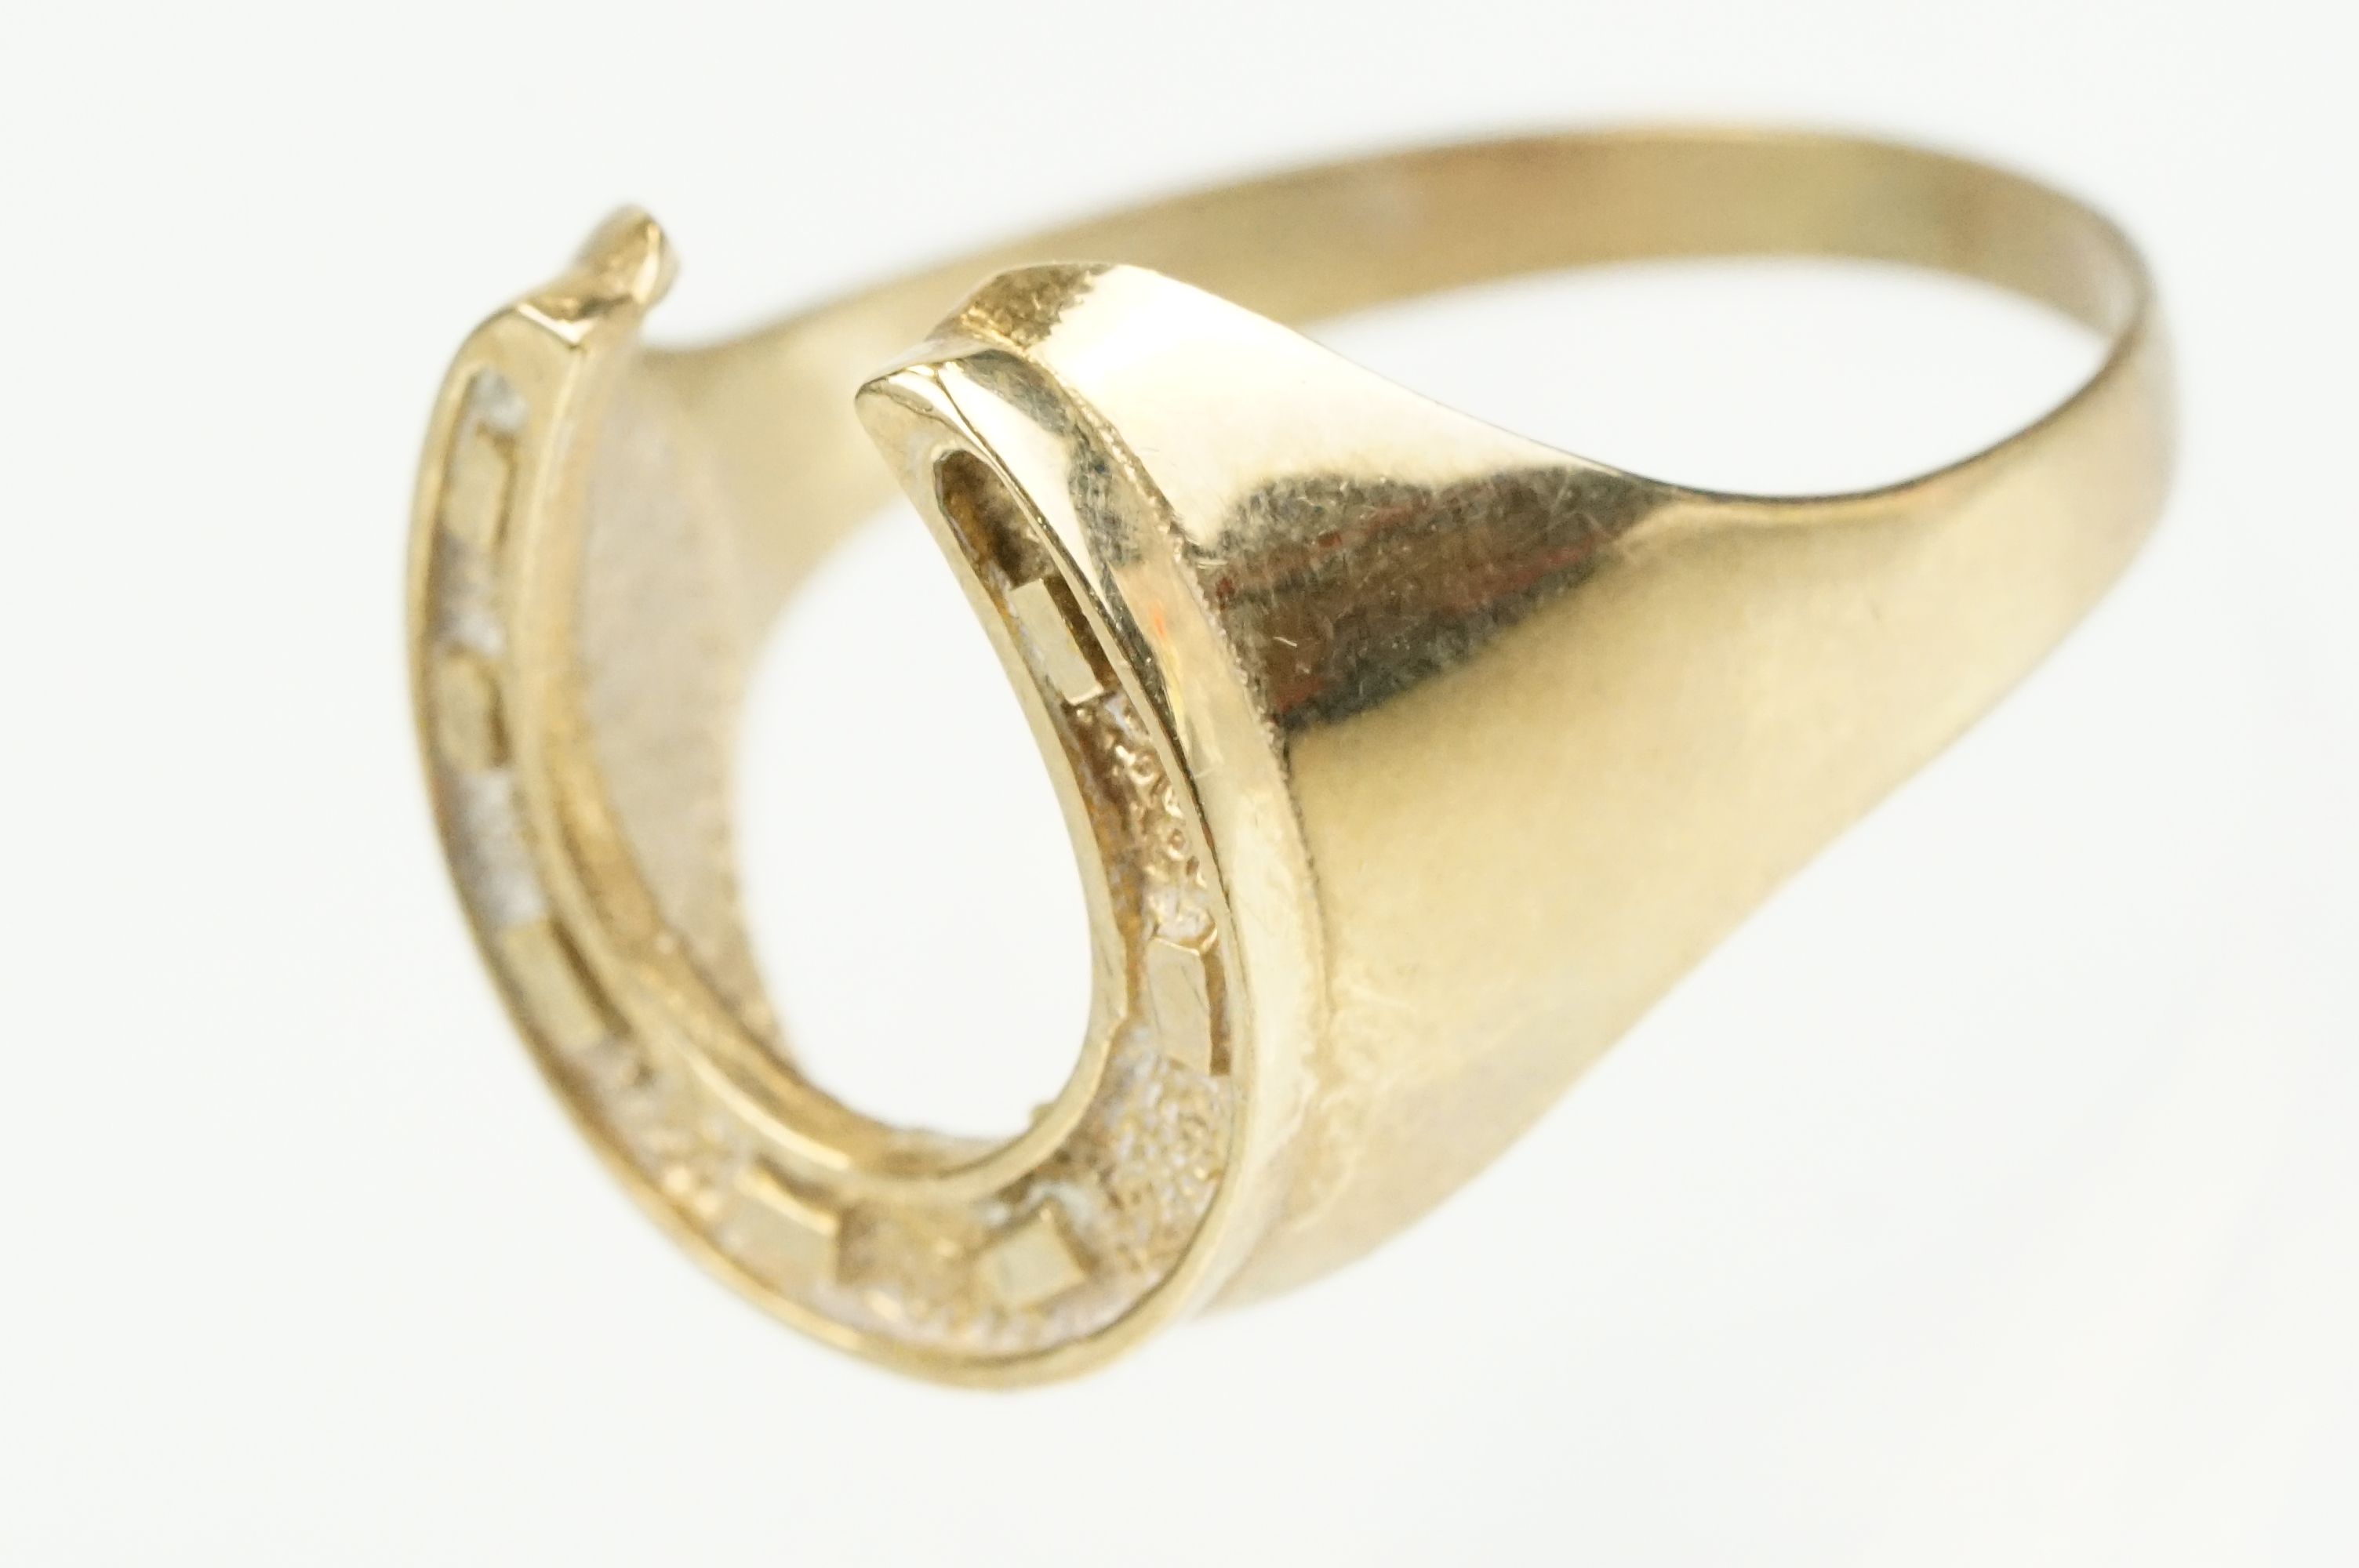 9ct gold horse shoe ring with moulded details. Hallmarked present but rubbed. Size S.5. - Image 3 of 8